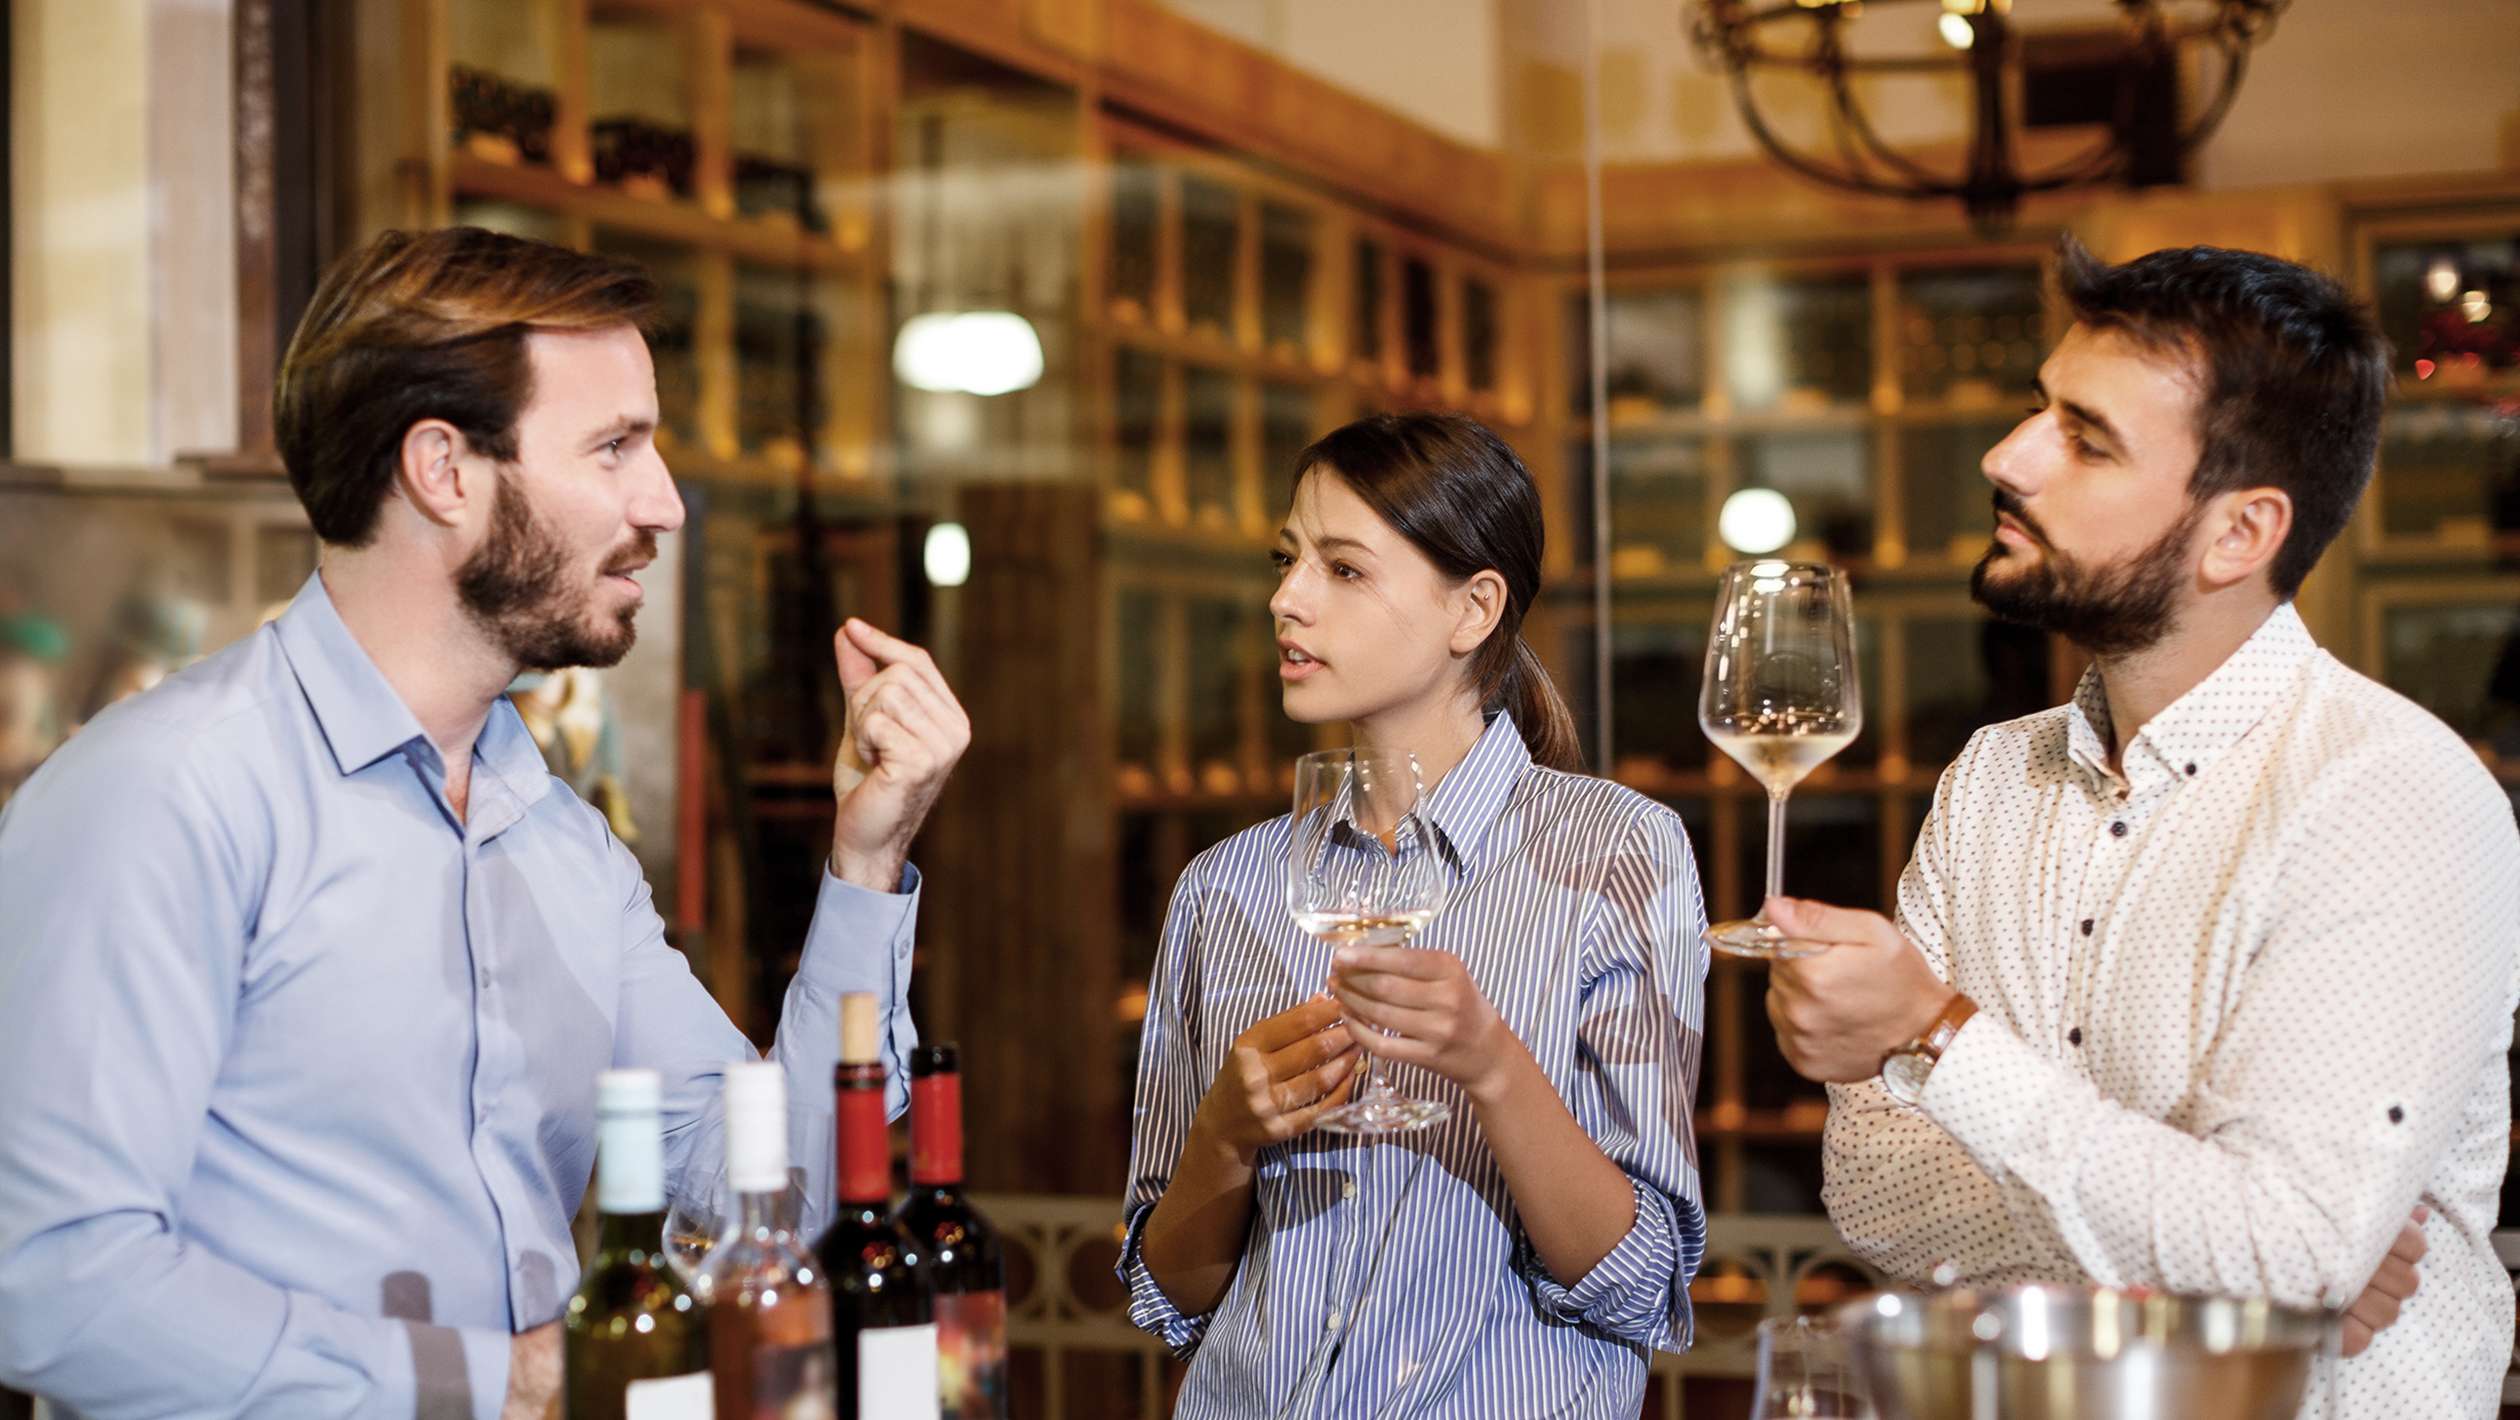 Three professionals discuss a selection of wines